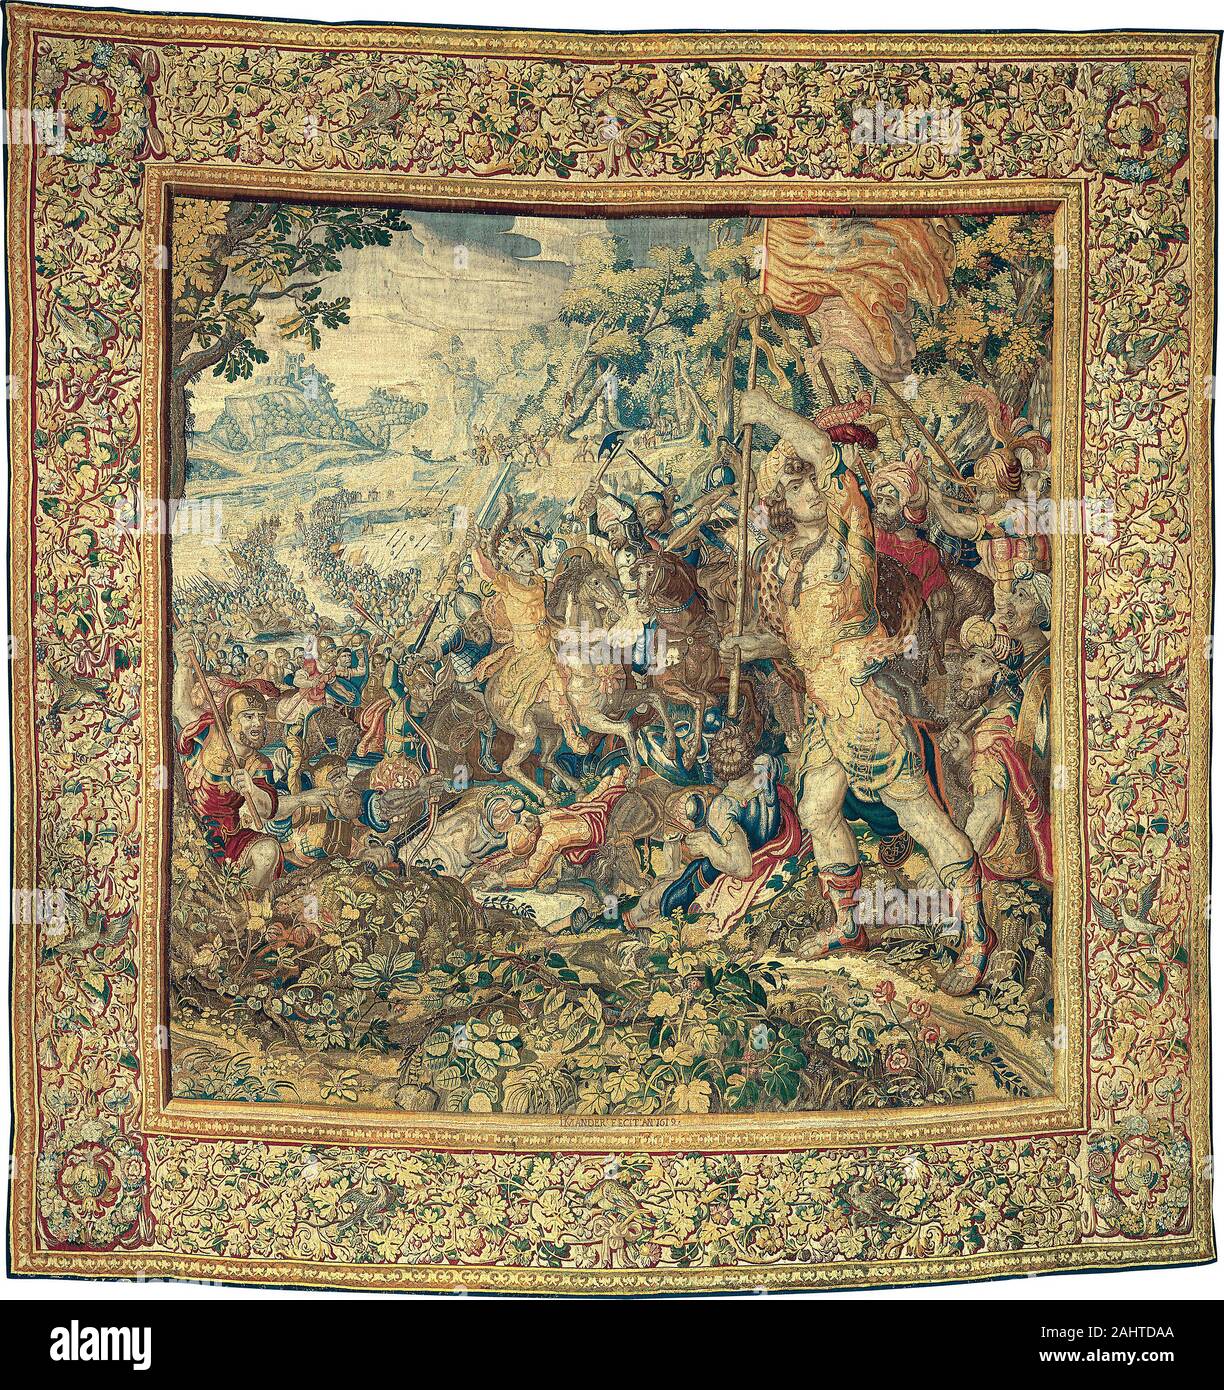 Karel van Mander, II (Designer). The Crossing of the Granicus, from The Story of Alexander the Great. 1619. Holland. Wool and silk, slit and double interlocking tapestry weave This tapestry dramatizes a battle fought in 334 B.C. between the Macedonians and the Persians. Alexander the great, king of the Macedonians, is depicted just left of center; dressed in ornate gilt armor, he rides a white horse and raises a sword boldly above his head. Facing him is a Persian general on a dark horse with both hands grasped around an axe. Although Alexander appears imperiled, he was ultimately victorious i Stock Photo